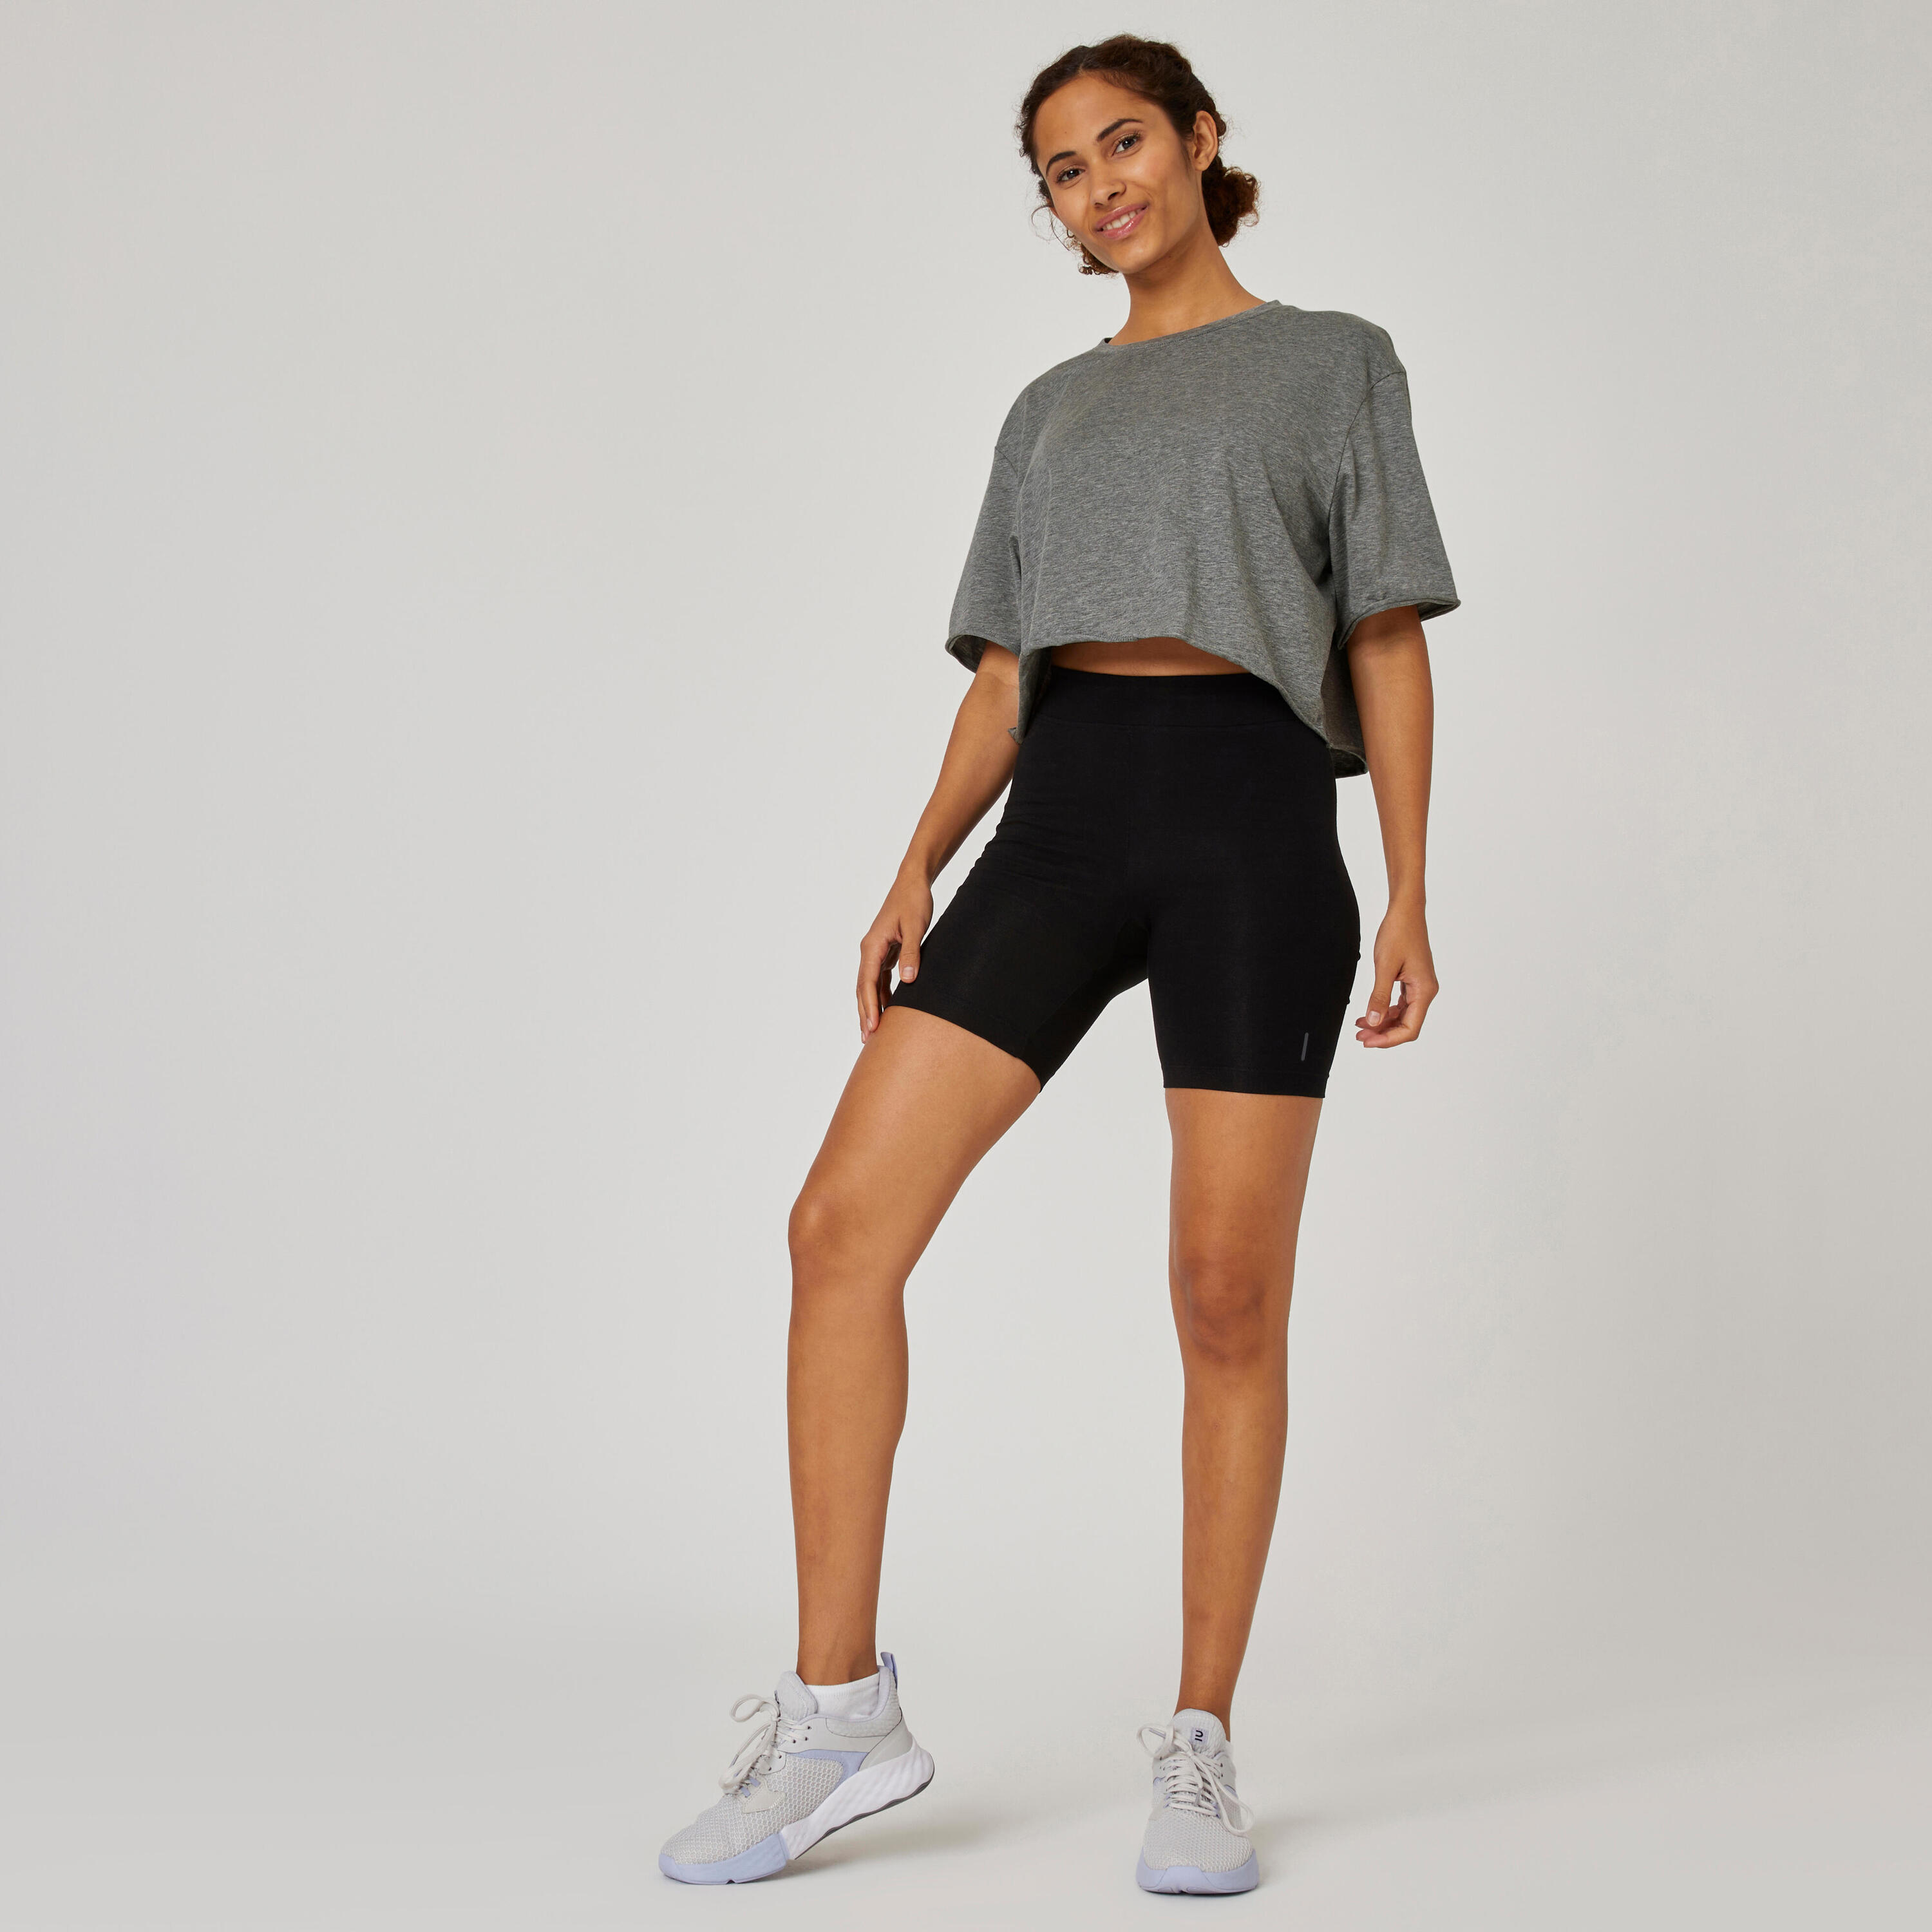 Women's Fitness Cropped T-Shirt 520 - Grey 4/6